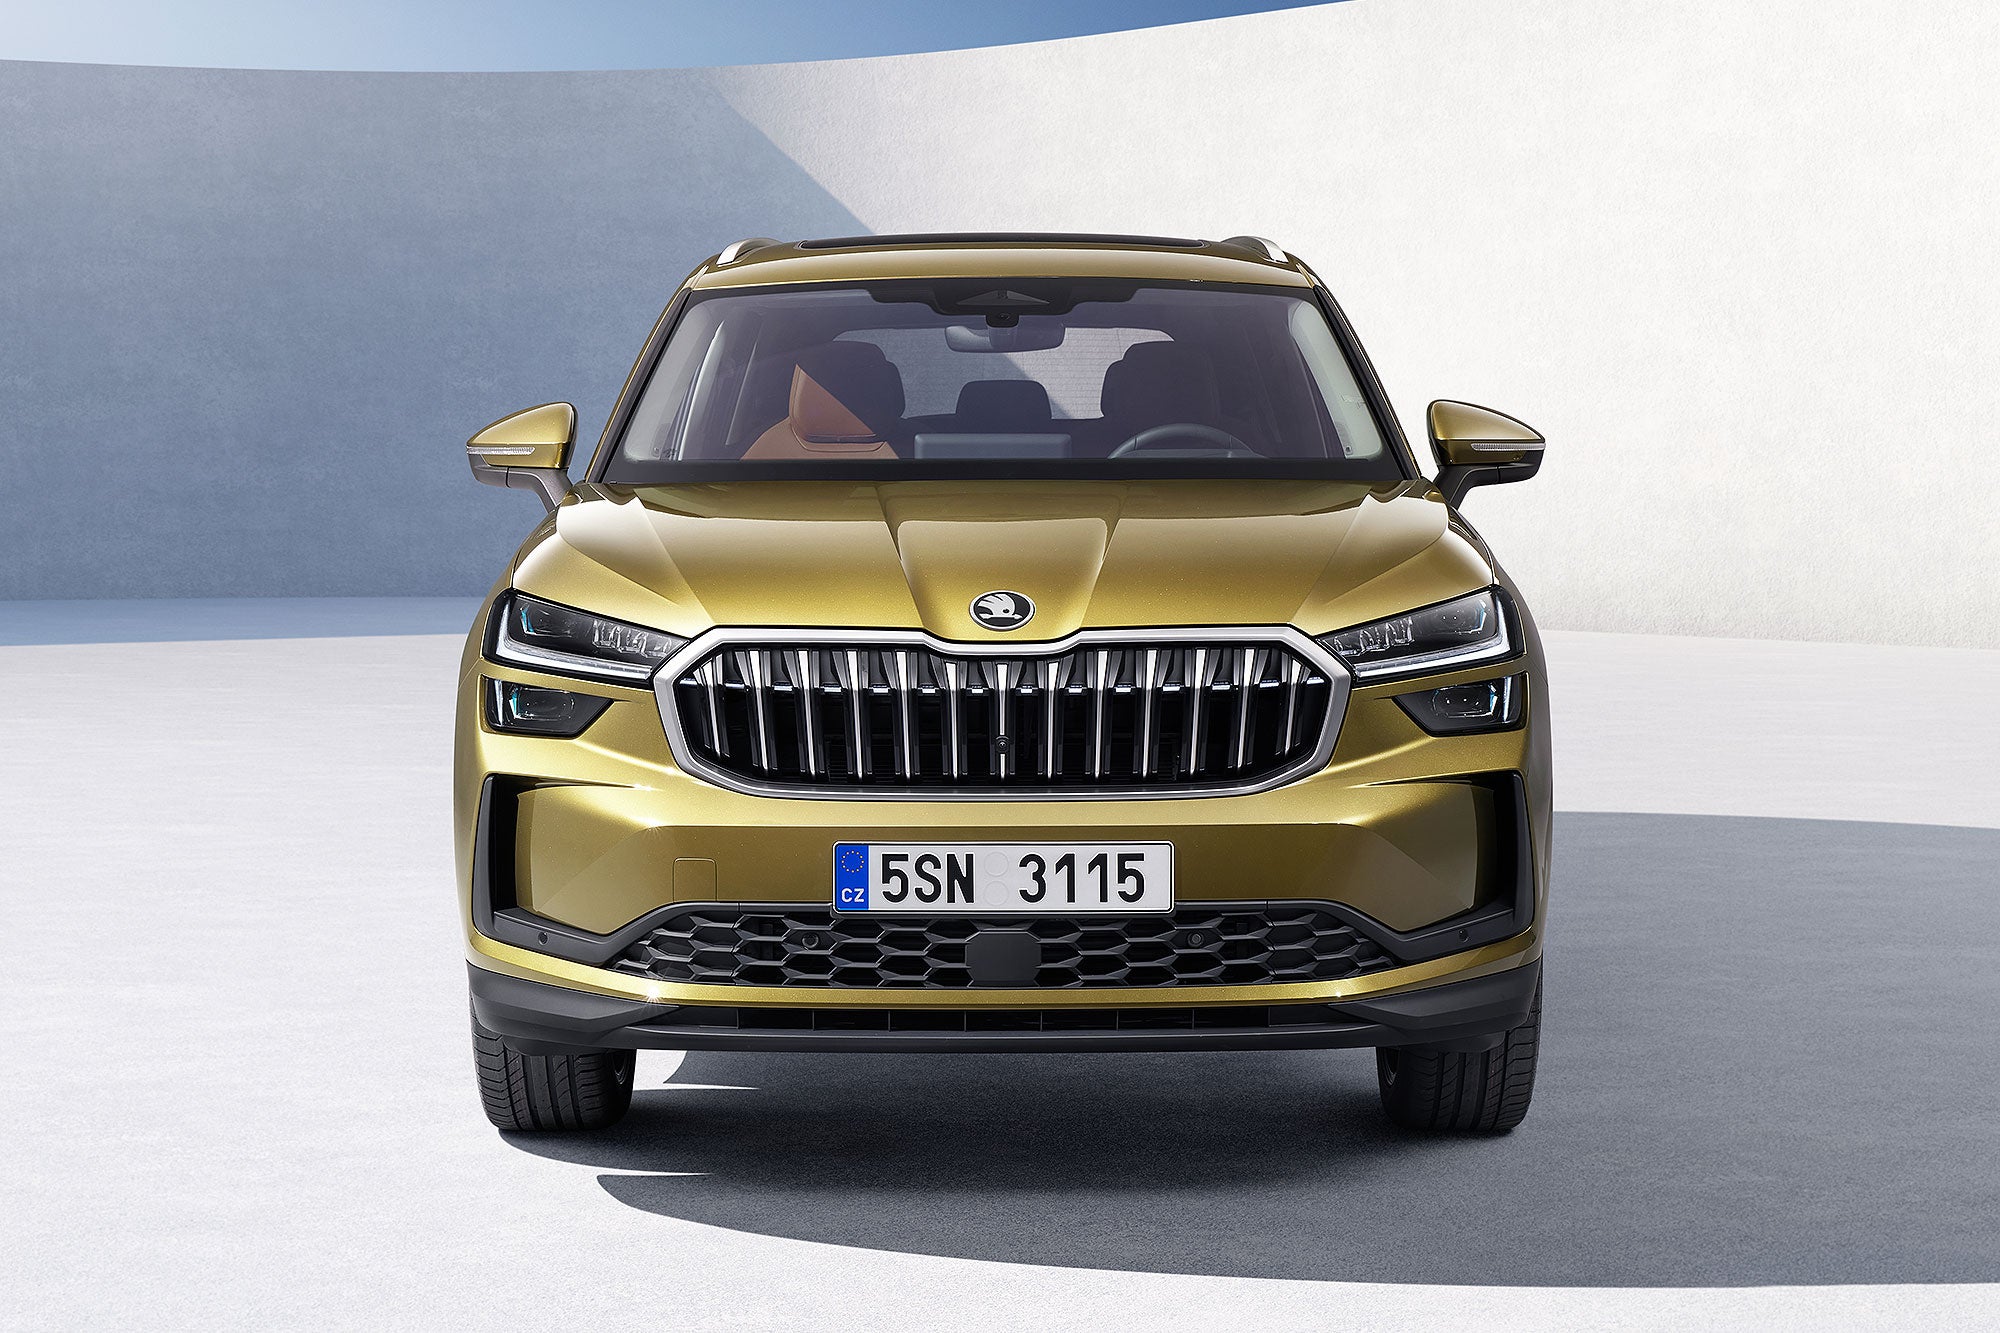 The new Skoda Kodiaq has been revealed ahead of arriving in the UK in 2024